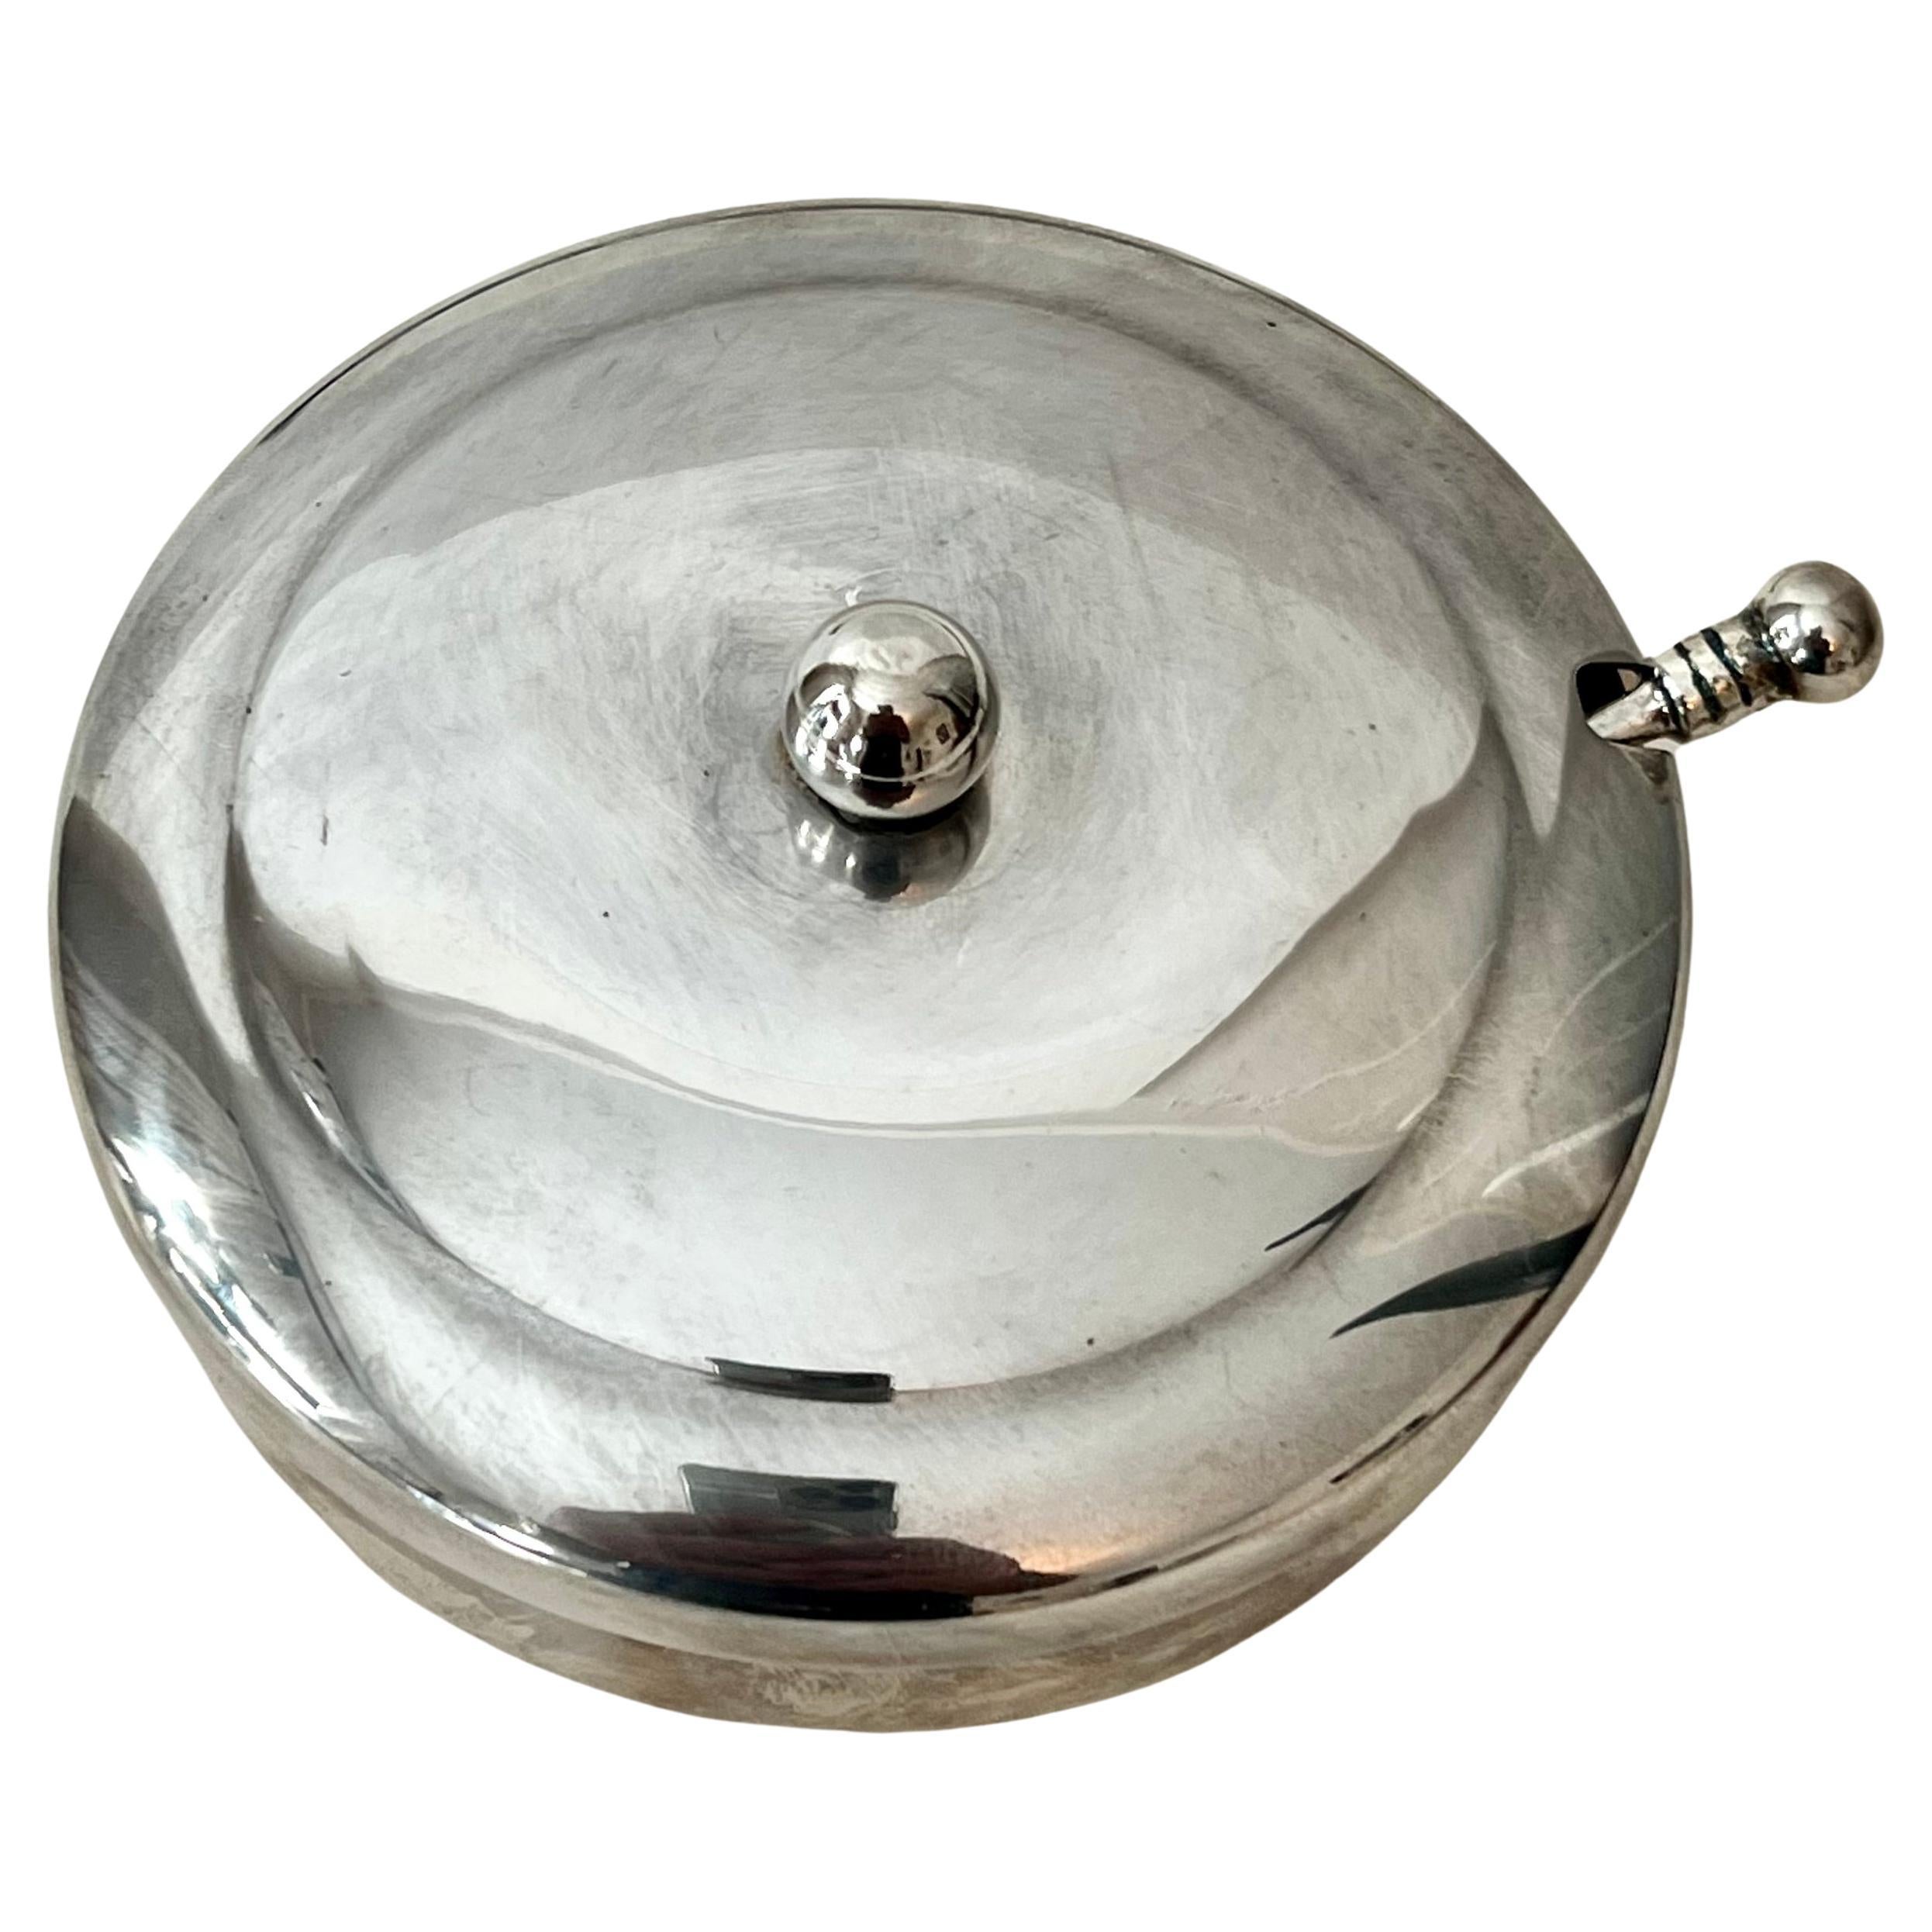 Silverplate Sugar or Condiment Bowl with Spoon For Sale